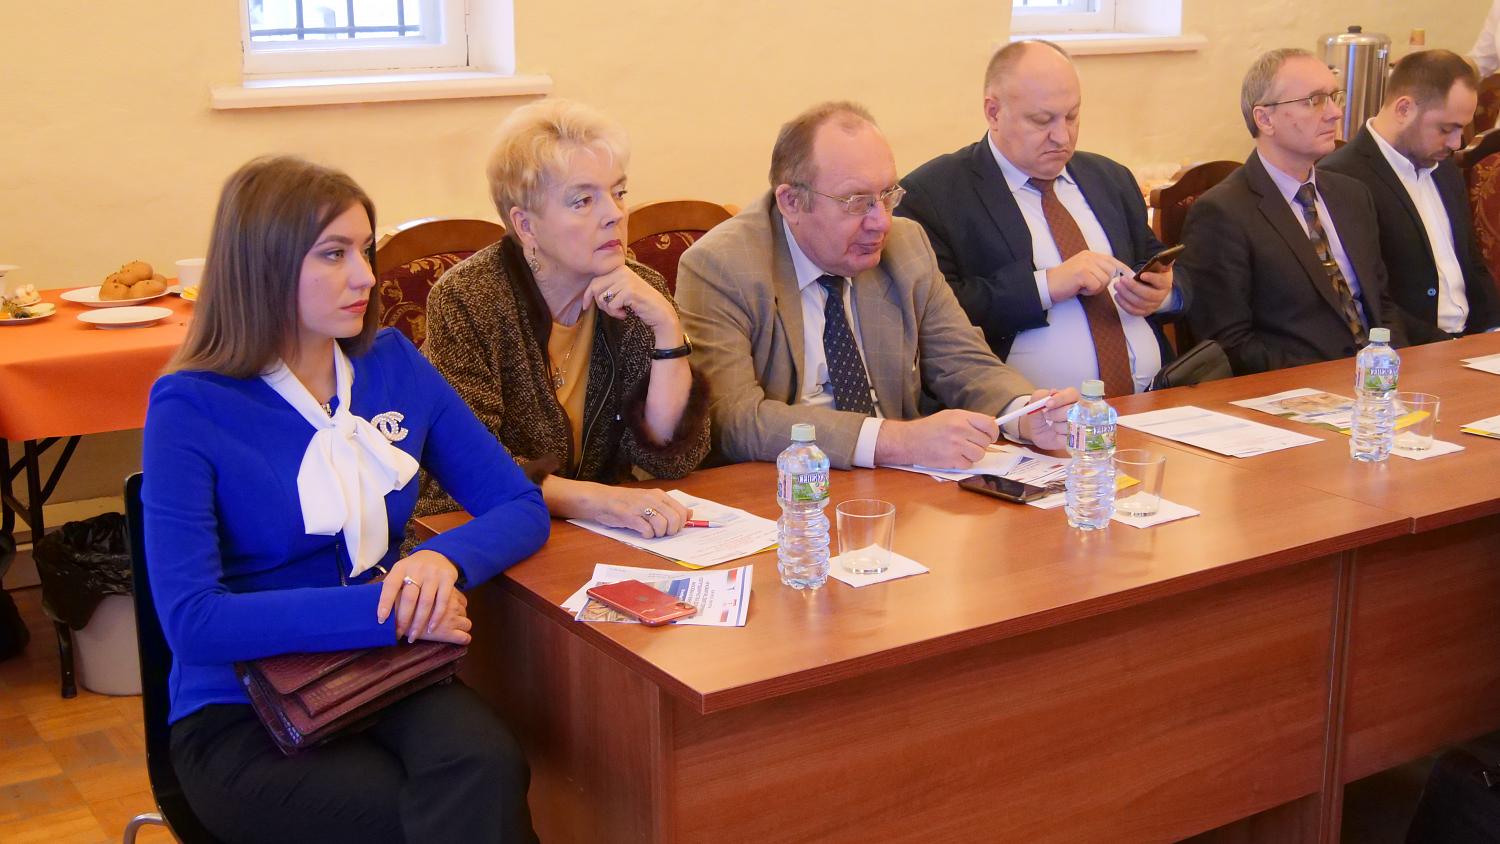 Moscow and Minsk companies took part in the business forum organized by the MCCI